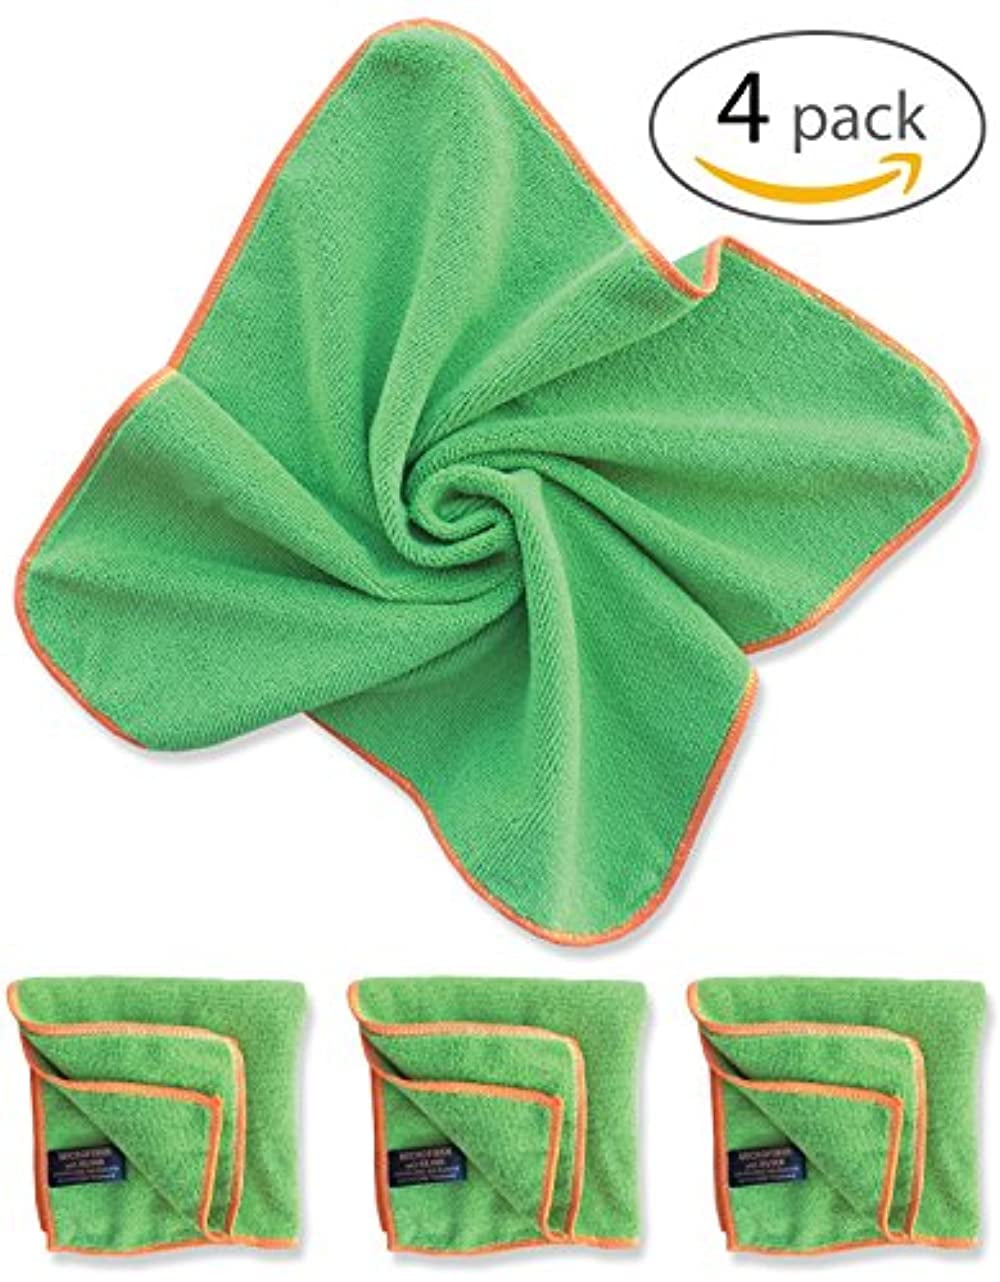 and Staph MERSA Bacteria Go Beyond Ordinary Cleaning — 10 Pack of Washable/Reusable Cloths 12 x12” Microfiber Cleaning Cloths with EPA Registered Silverclear DG-300 Proven Killer of Viruses 